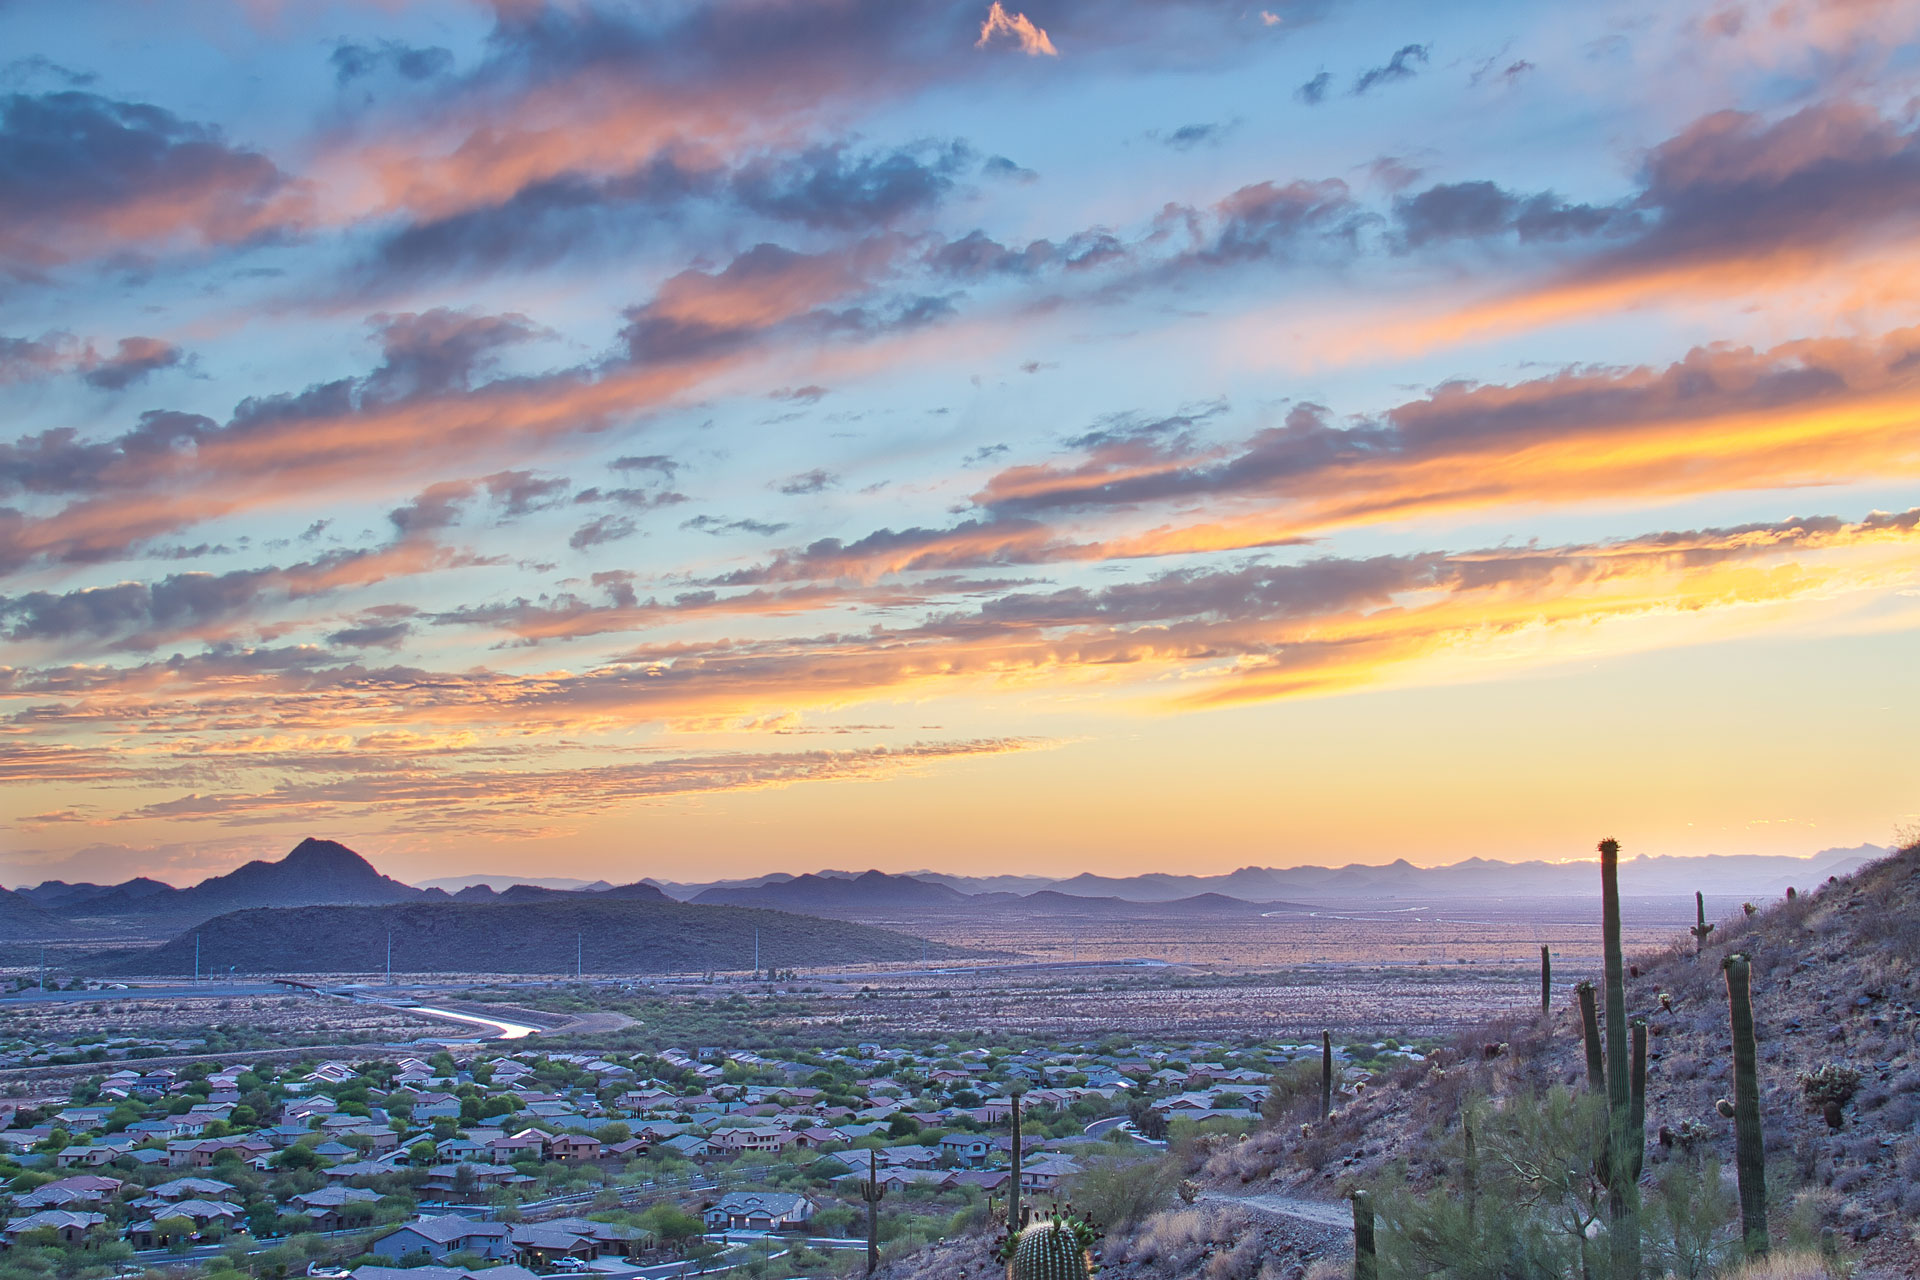 One of the most popular Scottsdale activities: watching the sunset!